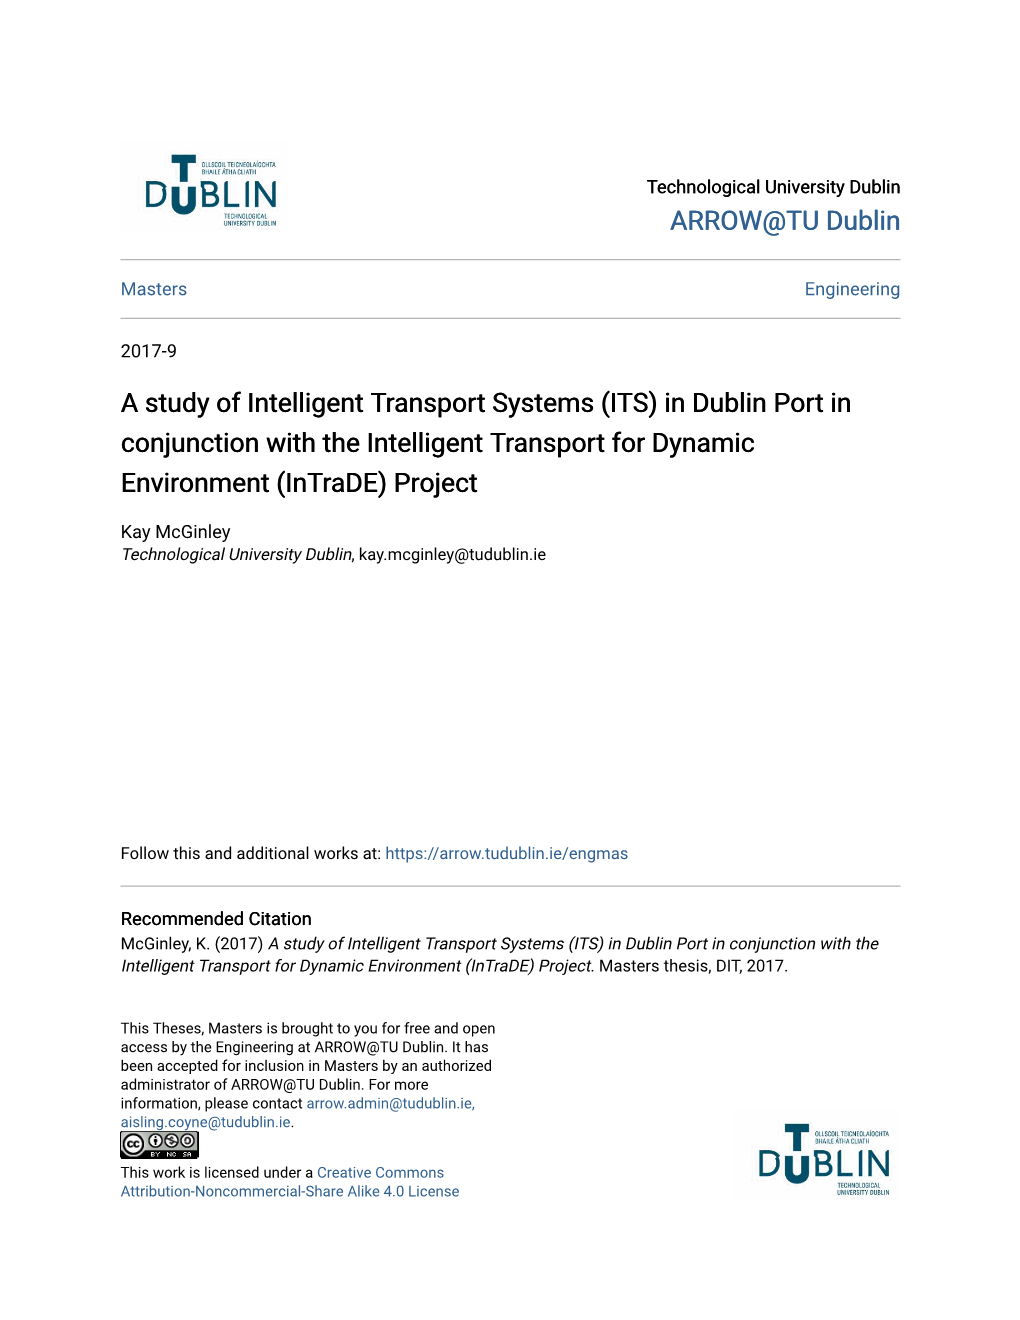 A Study of Intelligent Transport Systems (ITS) in Dublin Port in Conjunction with the Intelligent Transport for Dynamic Environment (Intrade) Project